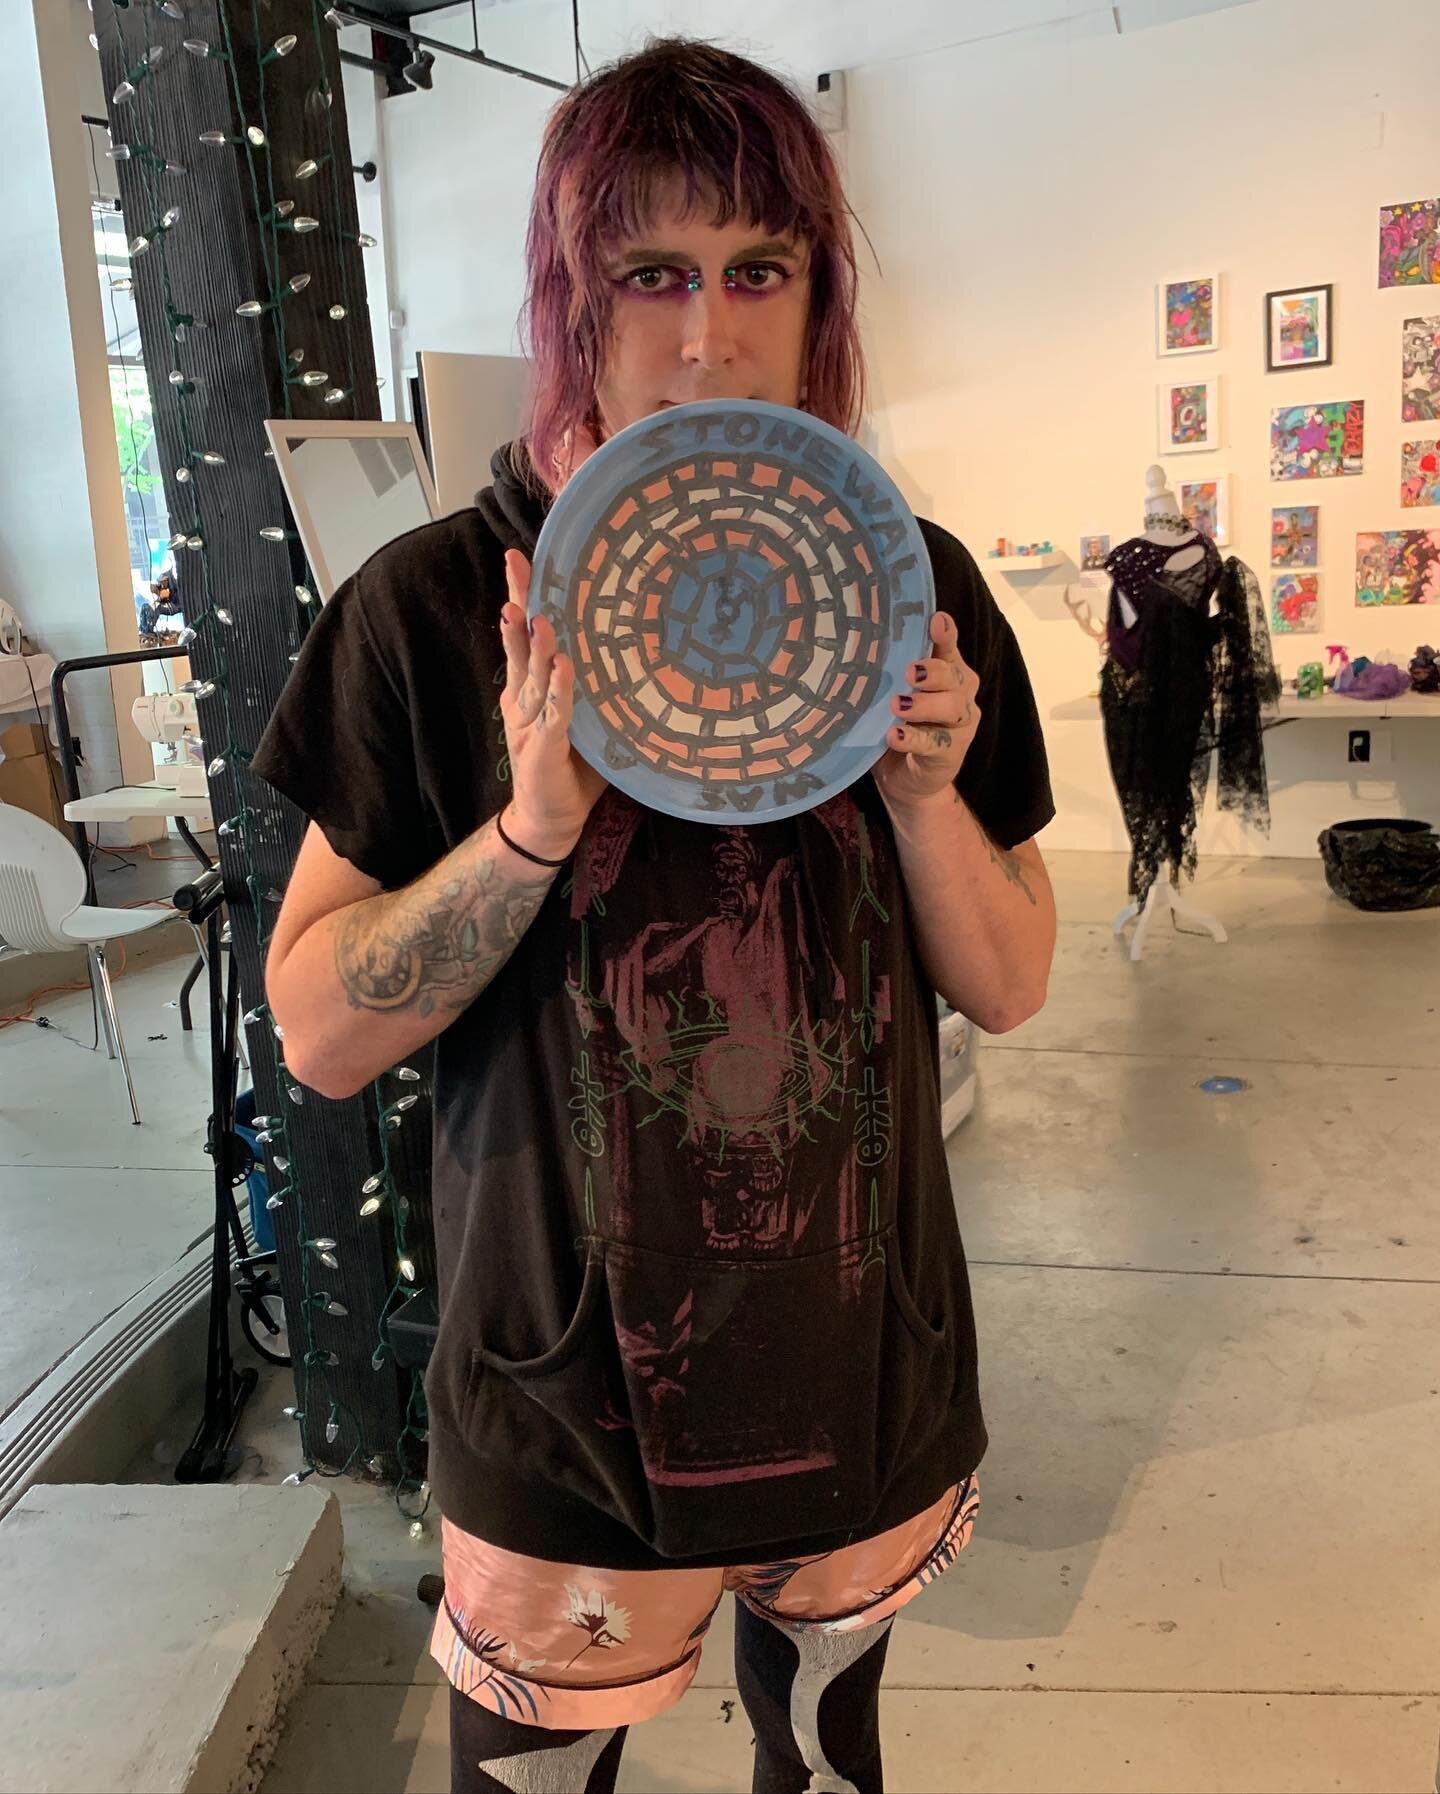 Happy #pride month y&rsquo;all, im loving this bowl Violet painted yesterday at @gathermakeshelter. 

Alt text:
Pictured is a girl with pink hair and a cool cut-up sweatshirt holding a bowl she just painted. It has bricks in the colors of the trans f